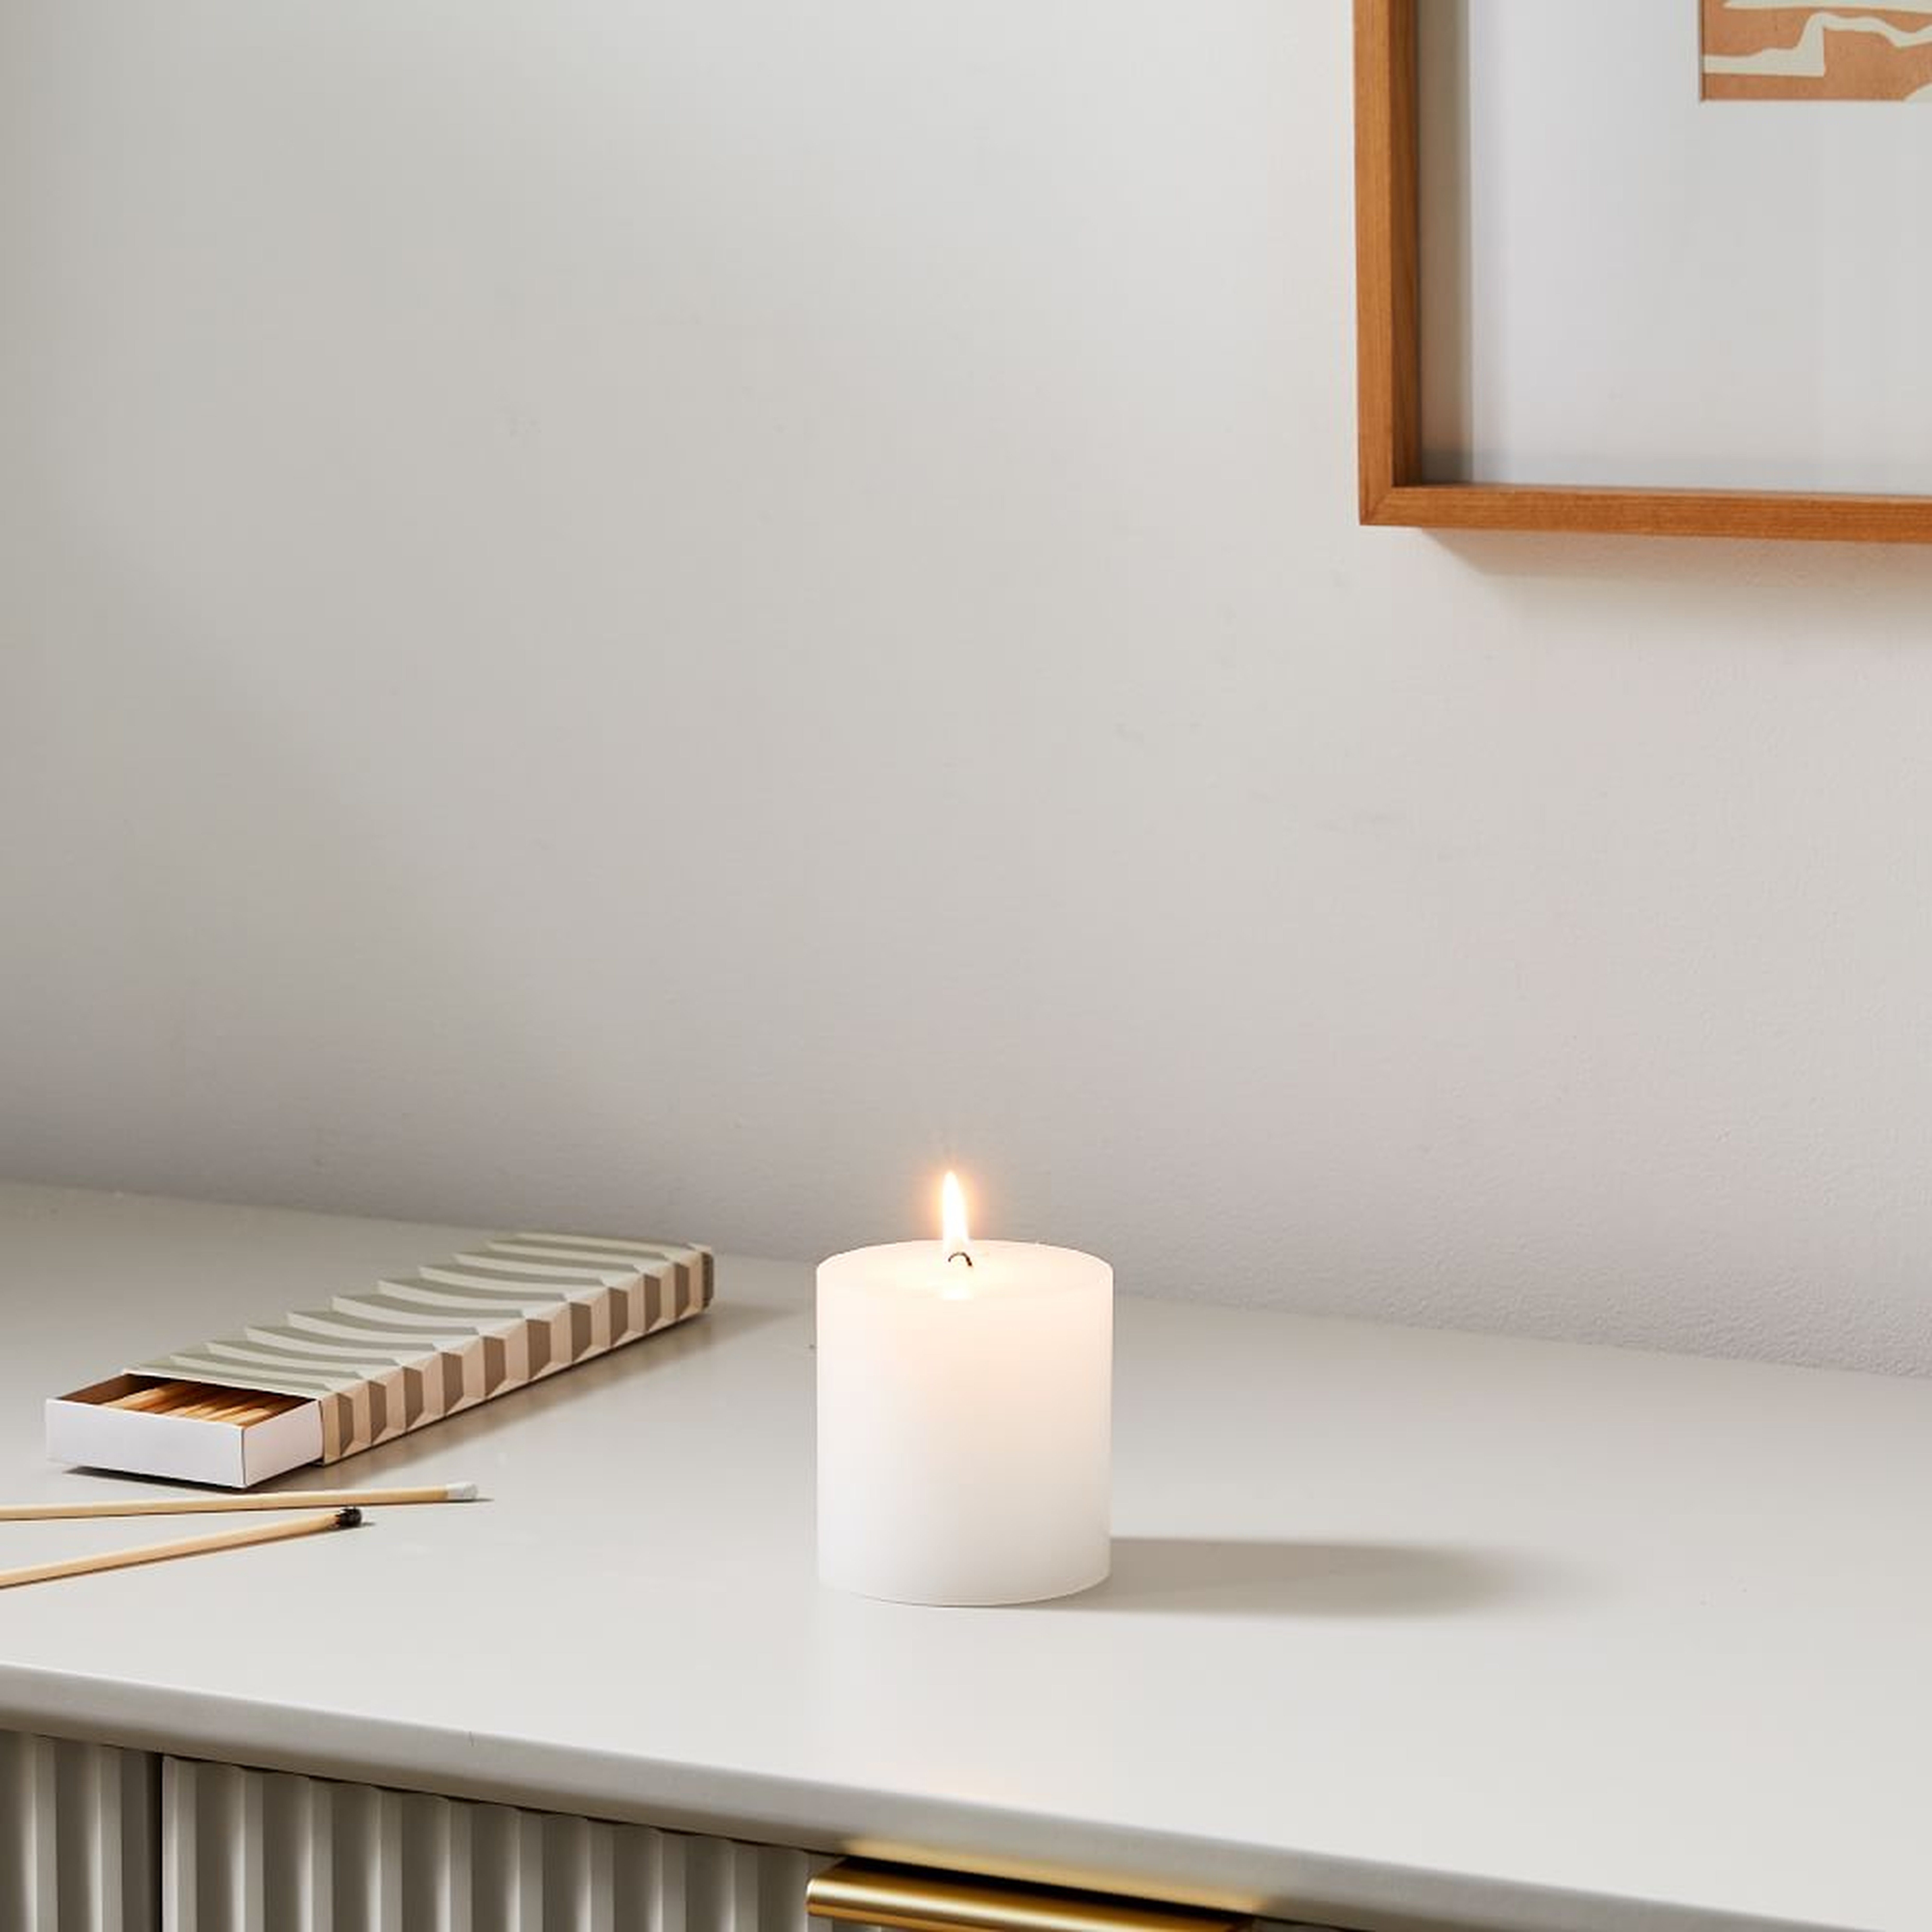 Unscented Pillar Candle, 3"x3", White - West Elm